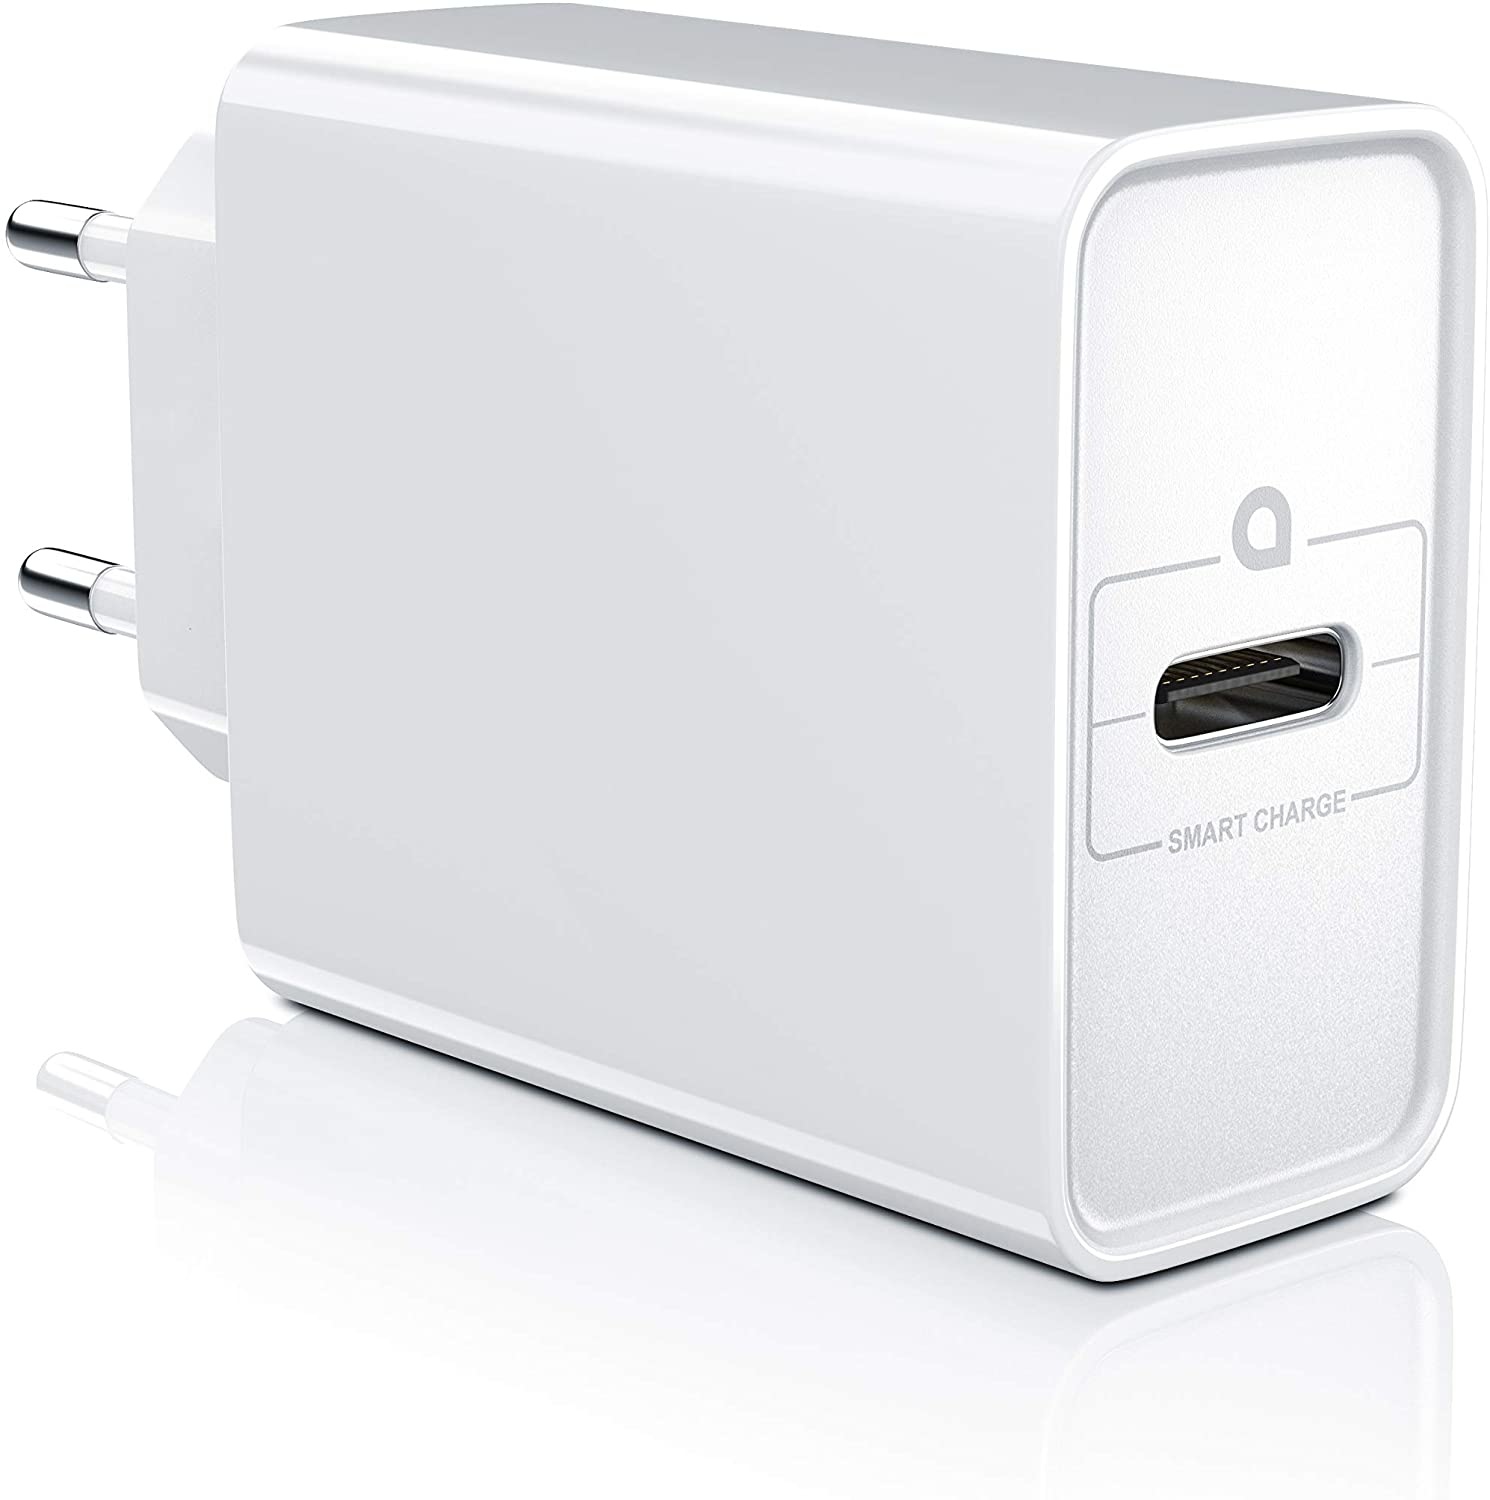 USB C Power Adapter 30w Apple. MAGSAFE Charger. Google 30w USB-C Power Charger. USB-C+C 35w Power Adapter.